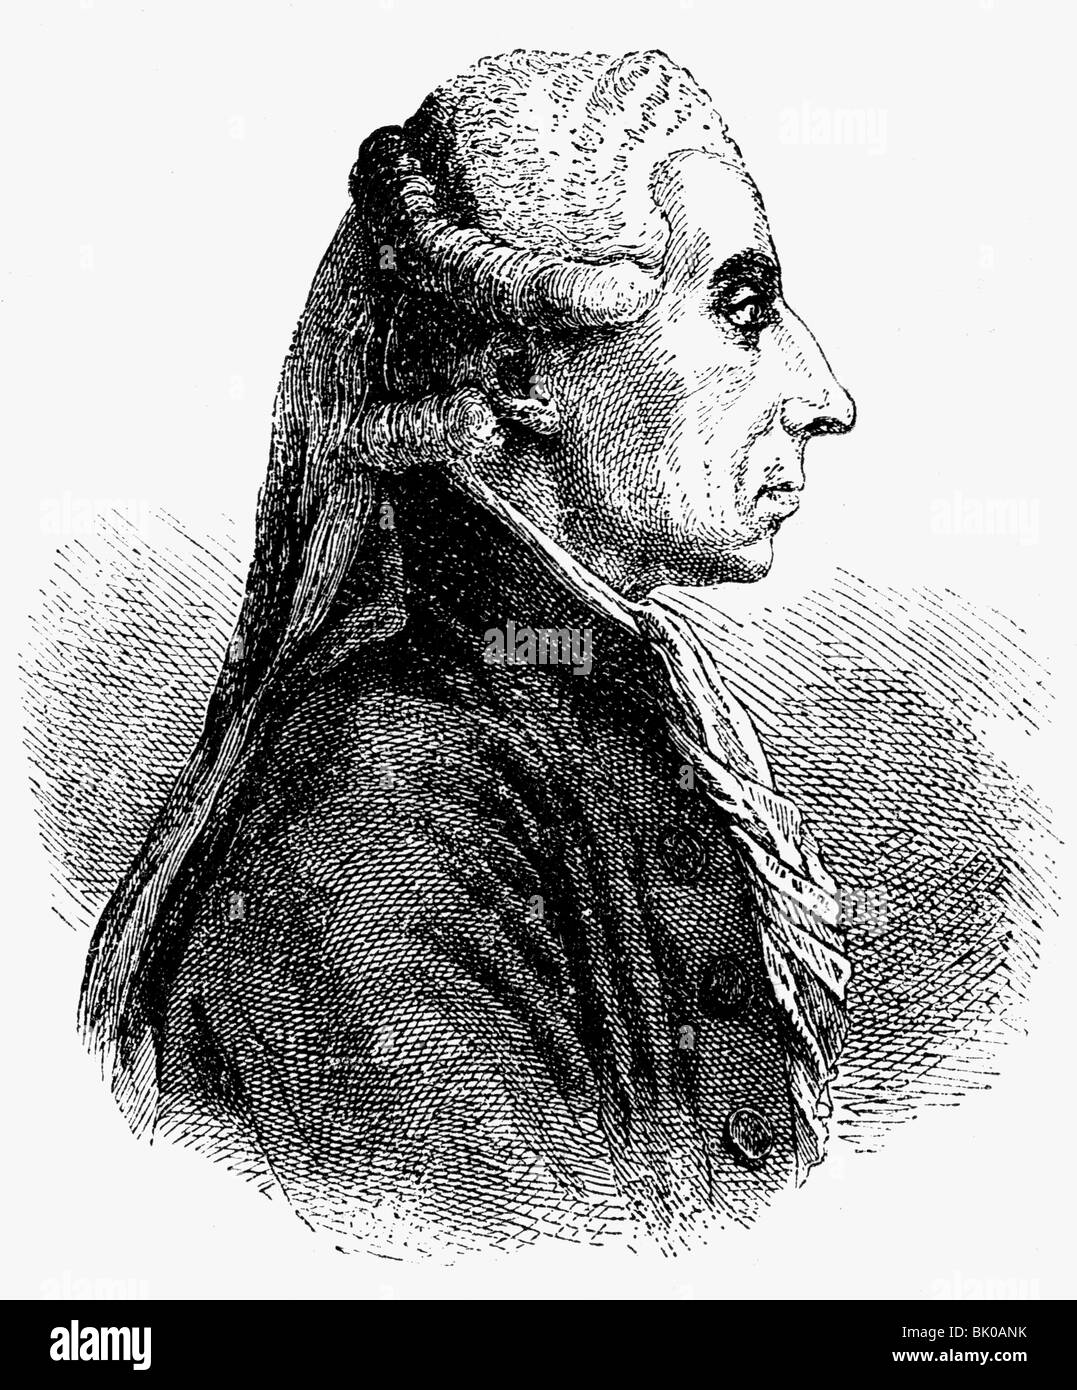 Bailly, Jean Sylvain, 15.9.1736 - 12.11.1793, French astronomer and politician, Mayor of Paris 15.7.1789 - 17.7.1791, portrait, side view, wood engraving, 19th century, , Stock Photo